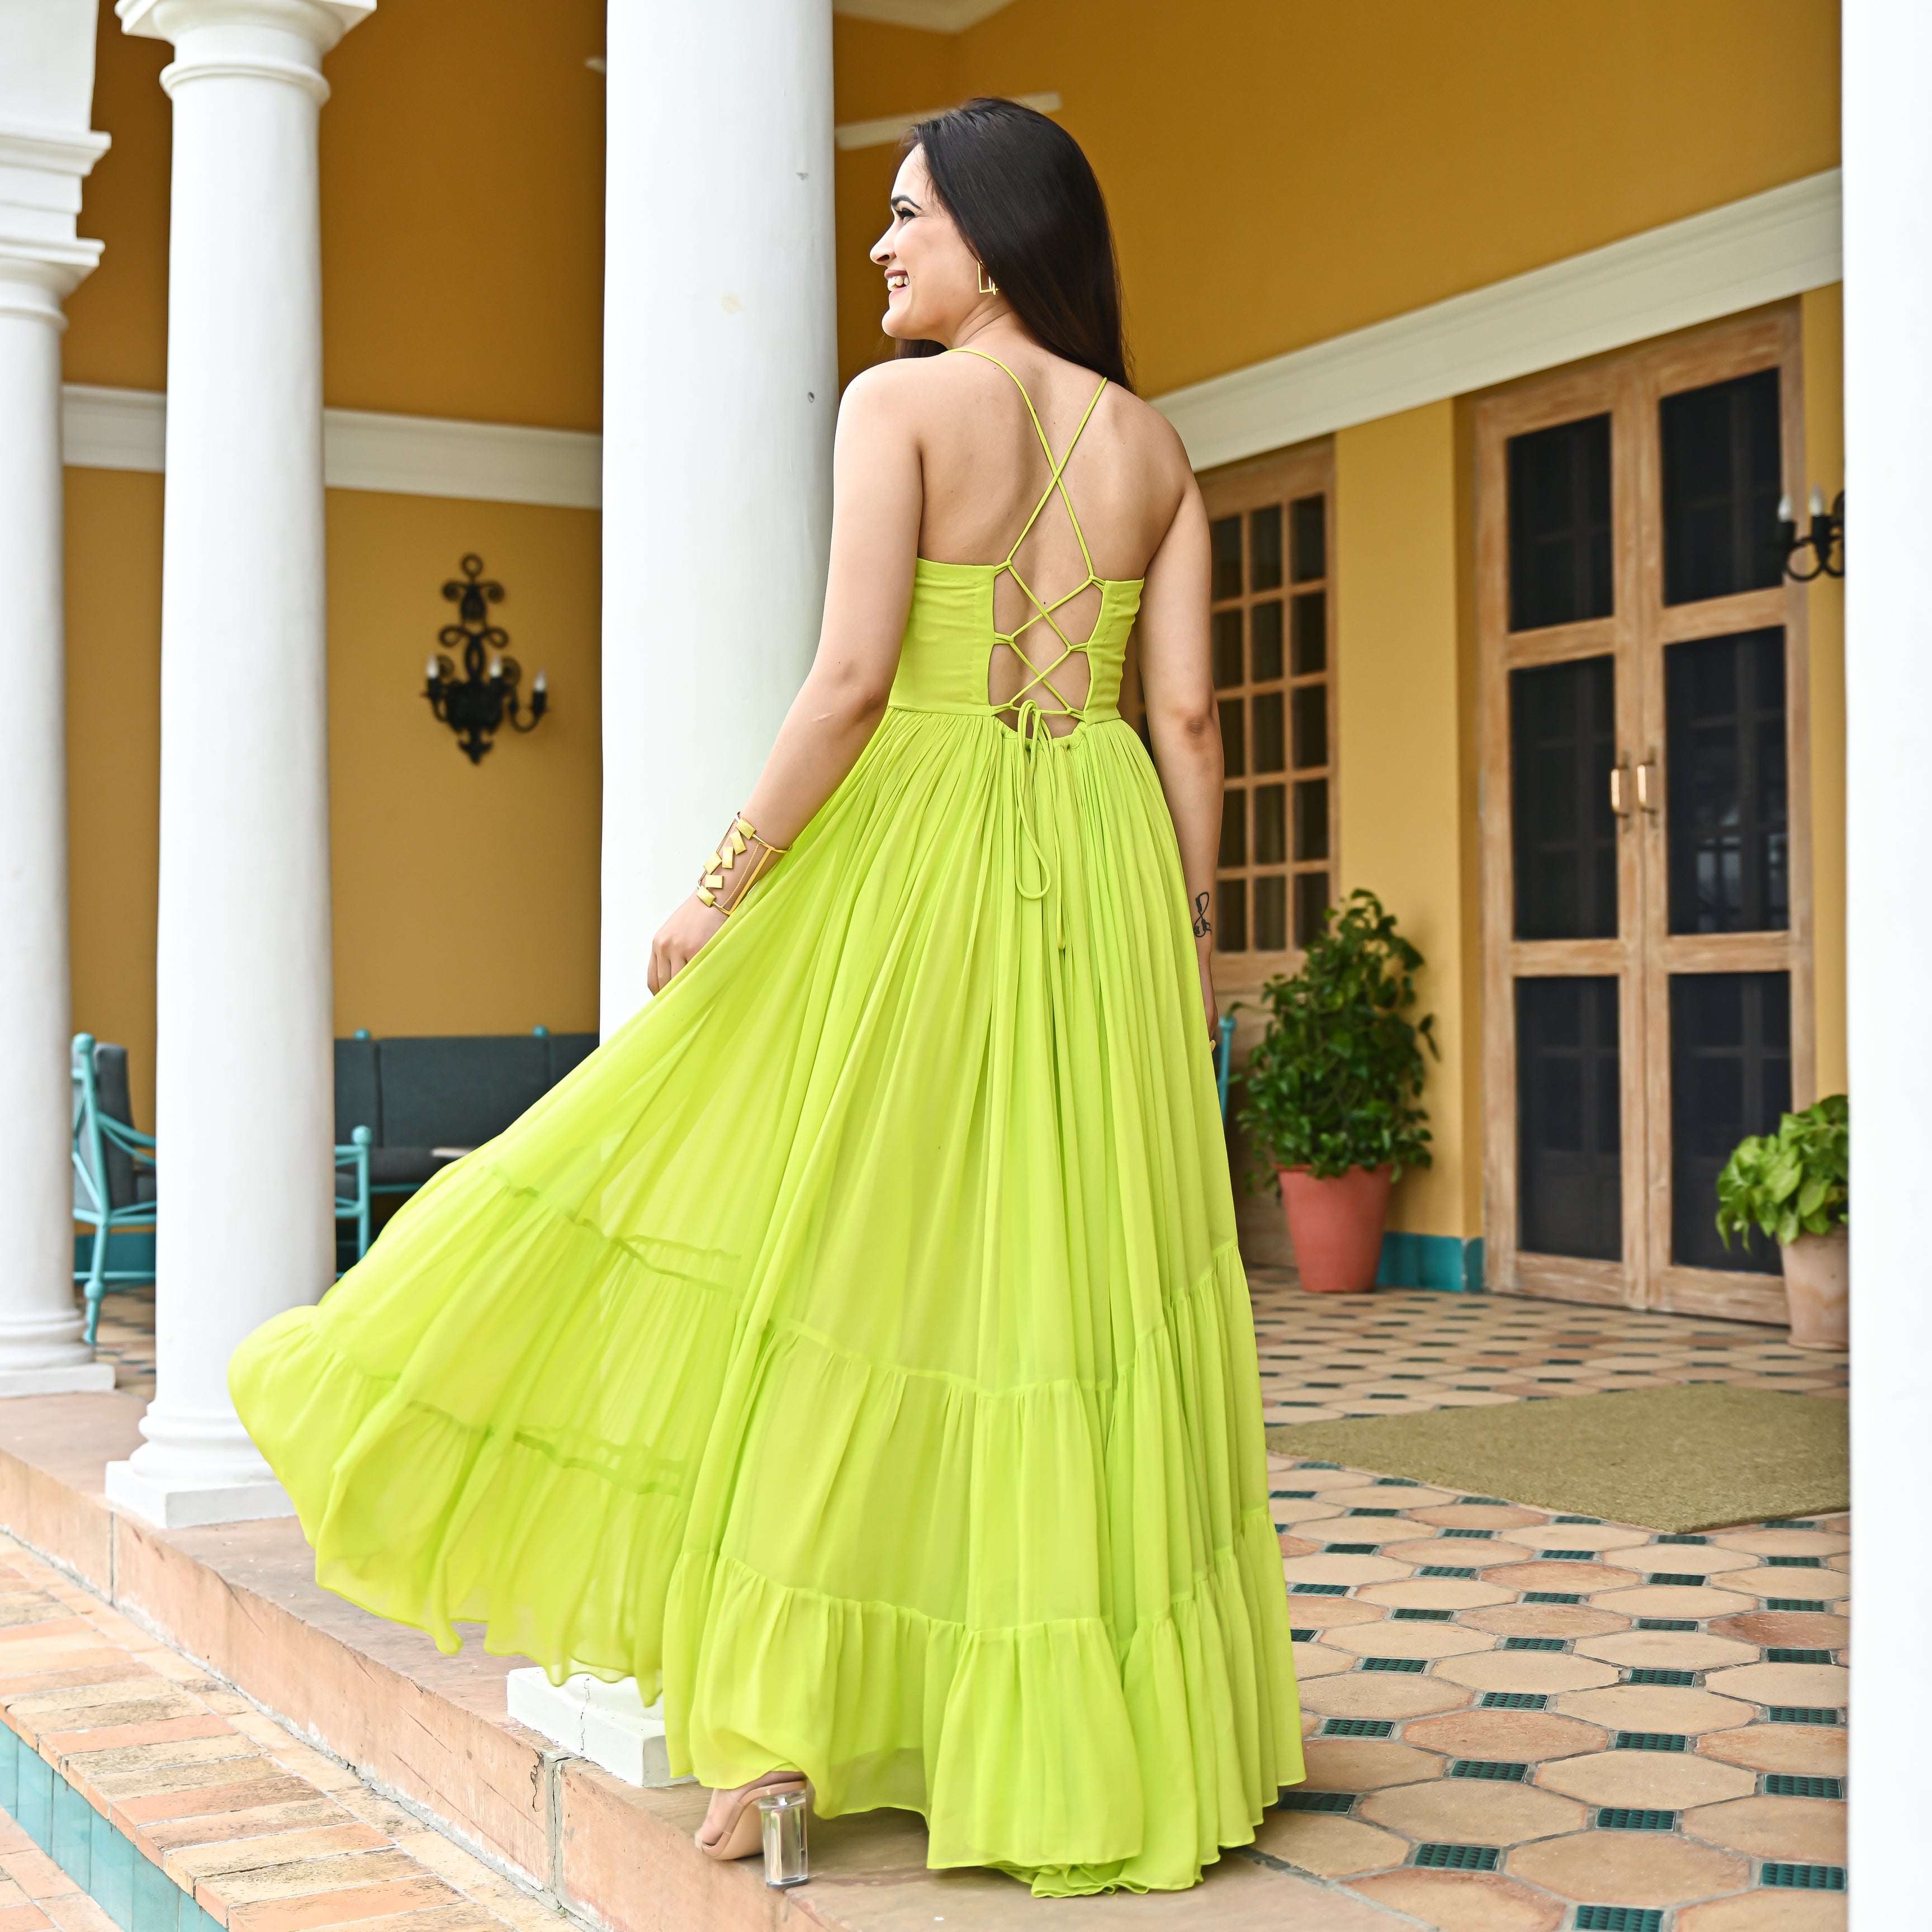 Bollywood actresses' who stunned in a backless dress | Times of India